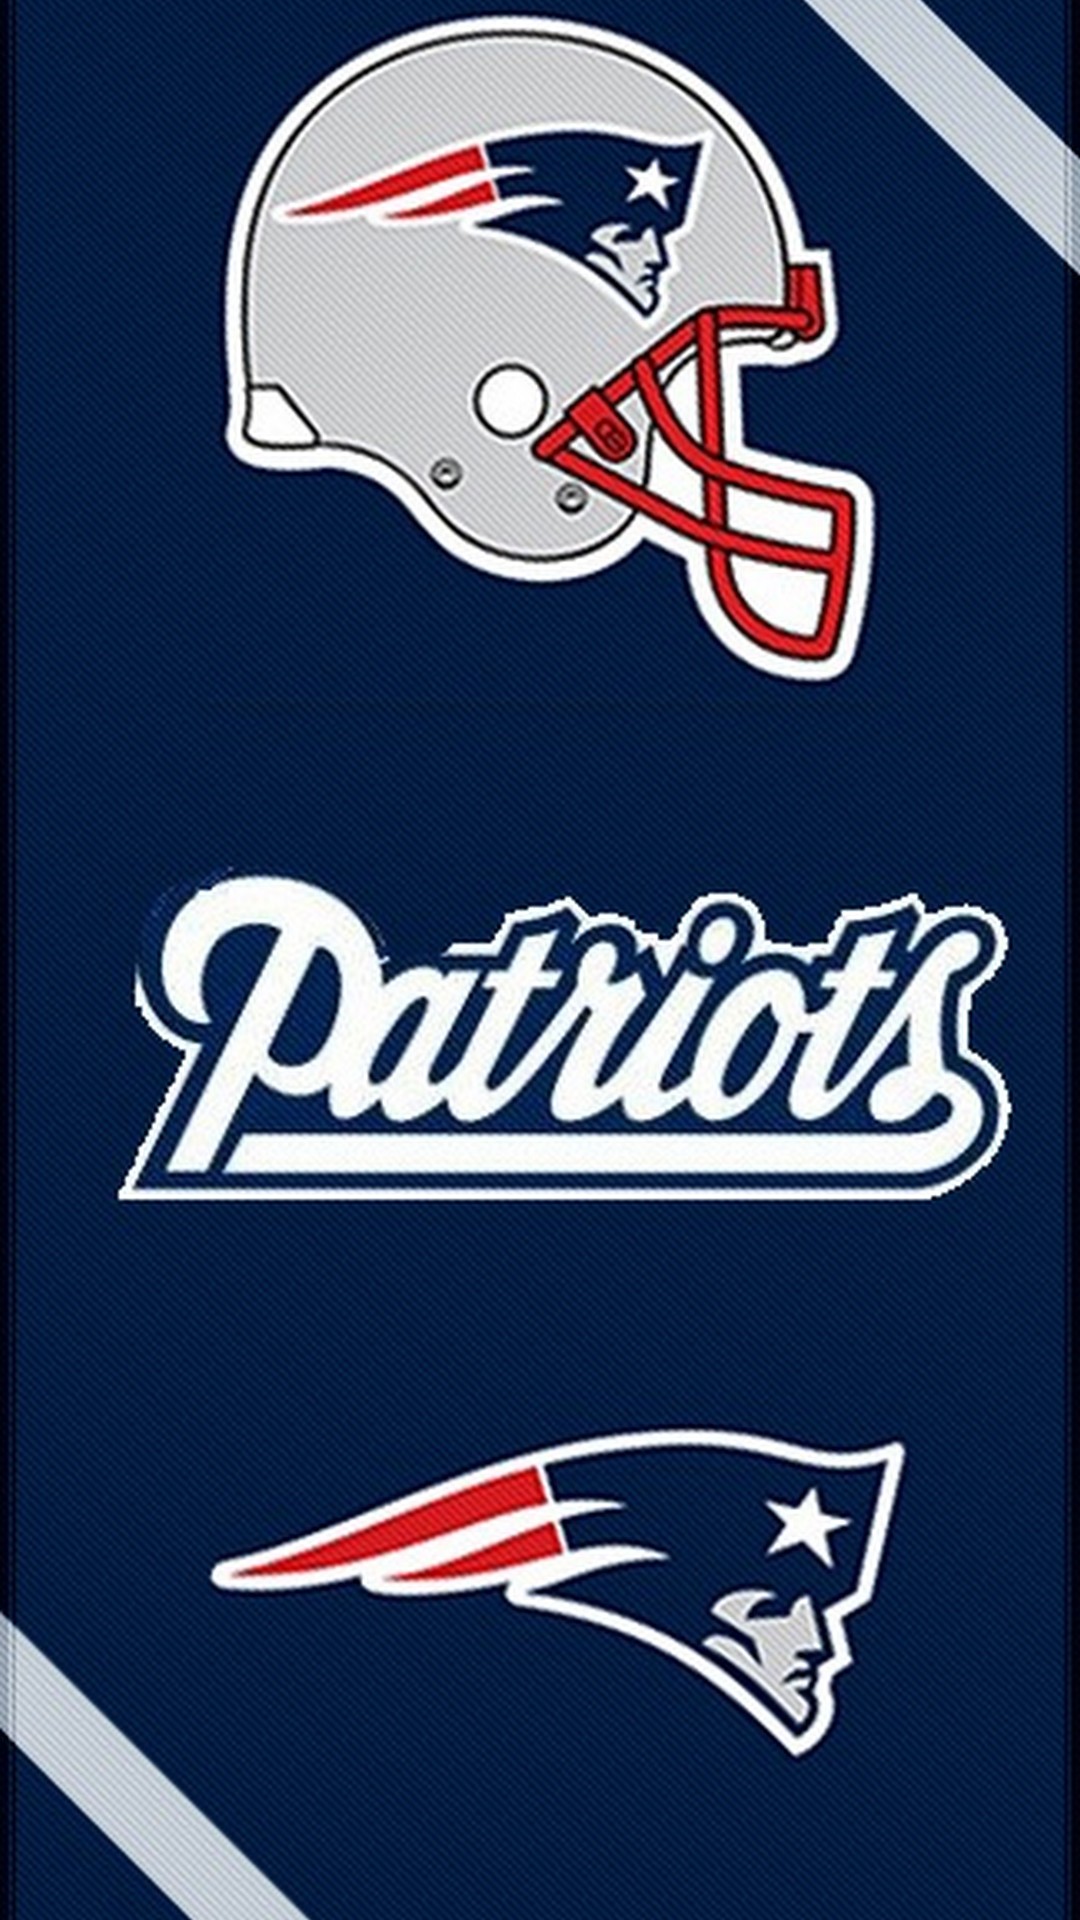 New England Patriots iPhone X Wallpaper with high-resolution 1080x1920 pixel. Download and set as wallpaper for Apple iPhone X, XS Max, XR, 8, 7, 6, SE, iPad, Android